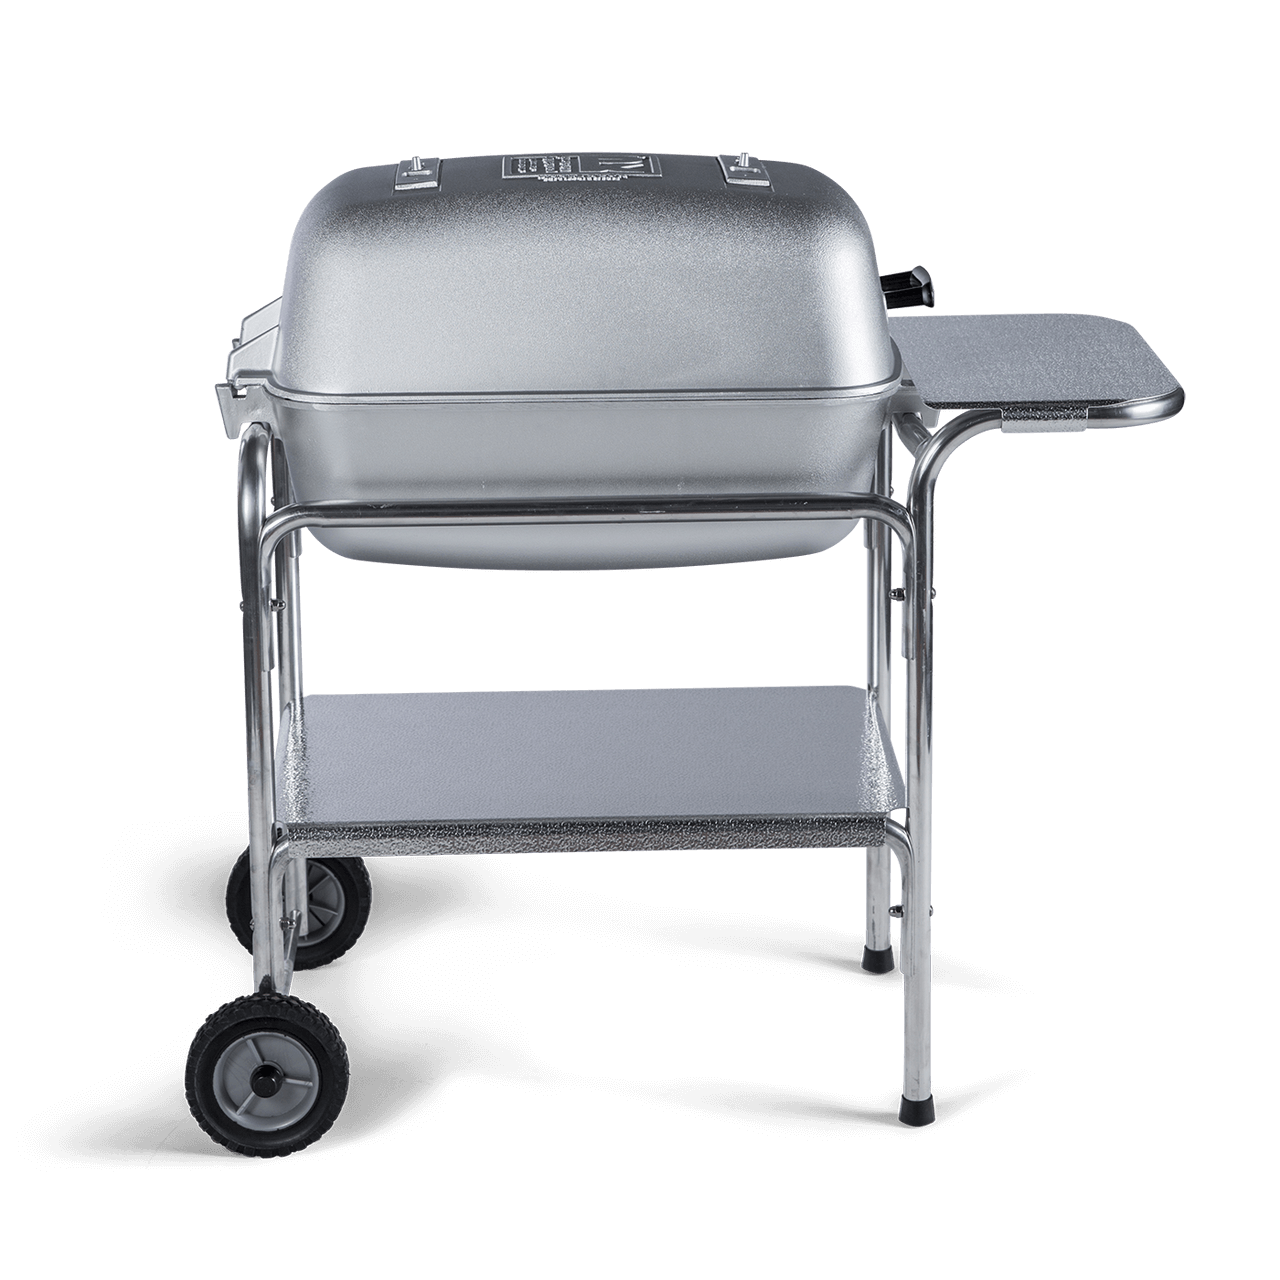 PK Grills the Original PK Grill and Smoker Silver